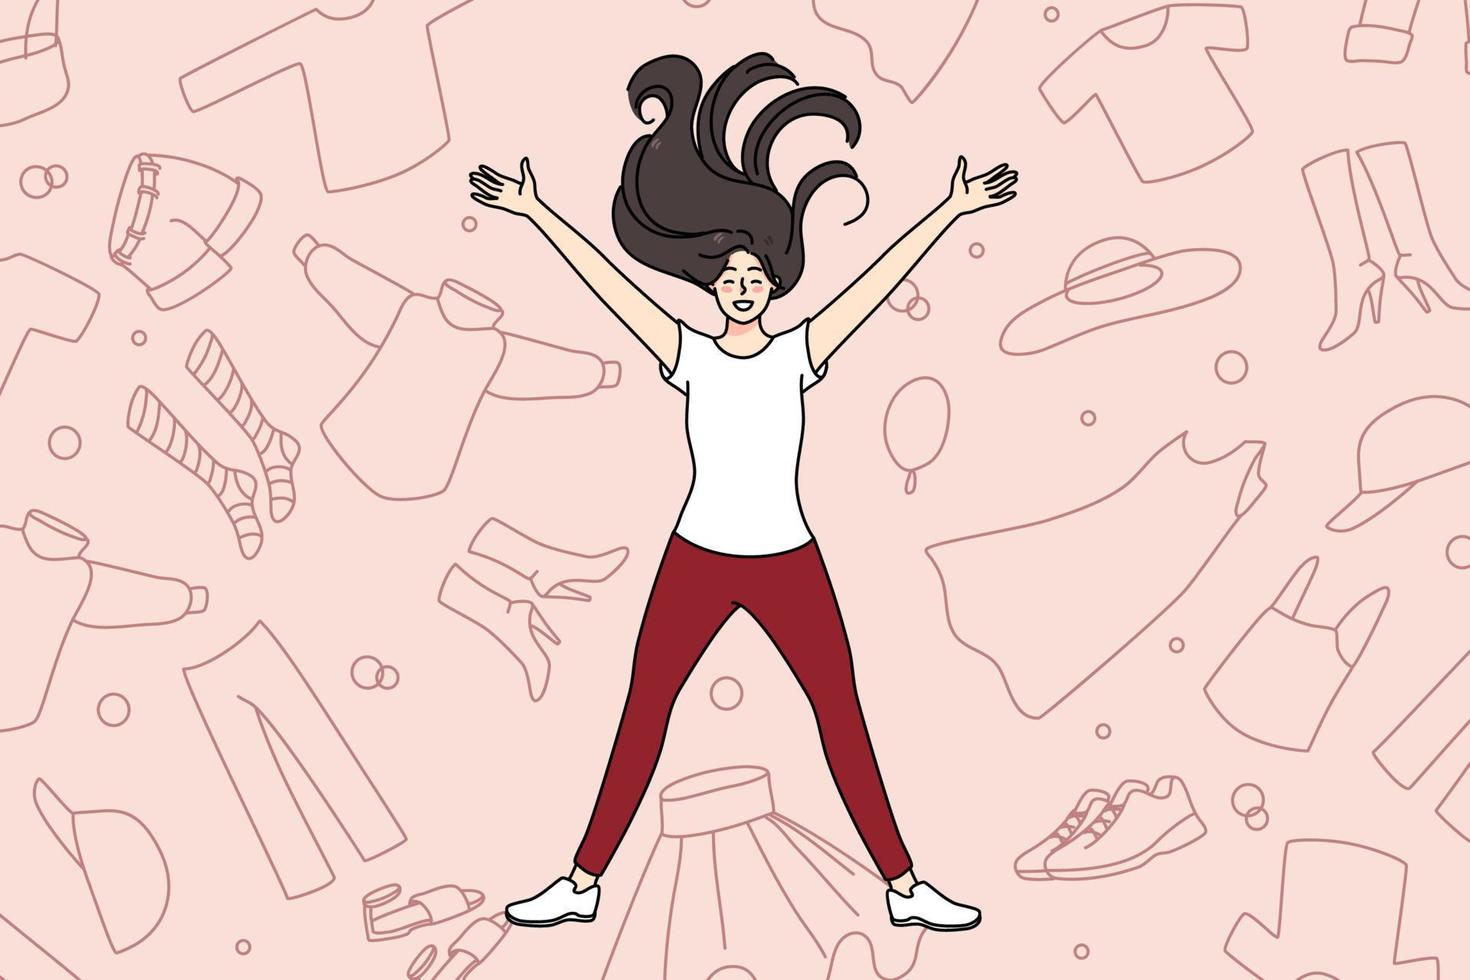 Overjoyed young girl lying among clothes excited with shopping and purchase. Smiling woman shopaholic with garment and apparel. Concept of consumerism and fast fashion. Vector illustration.